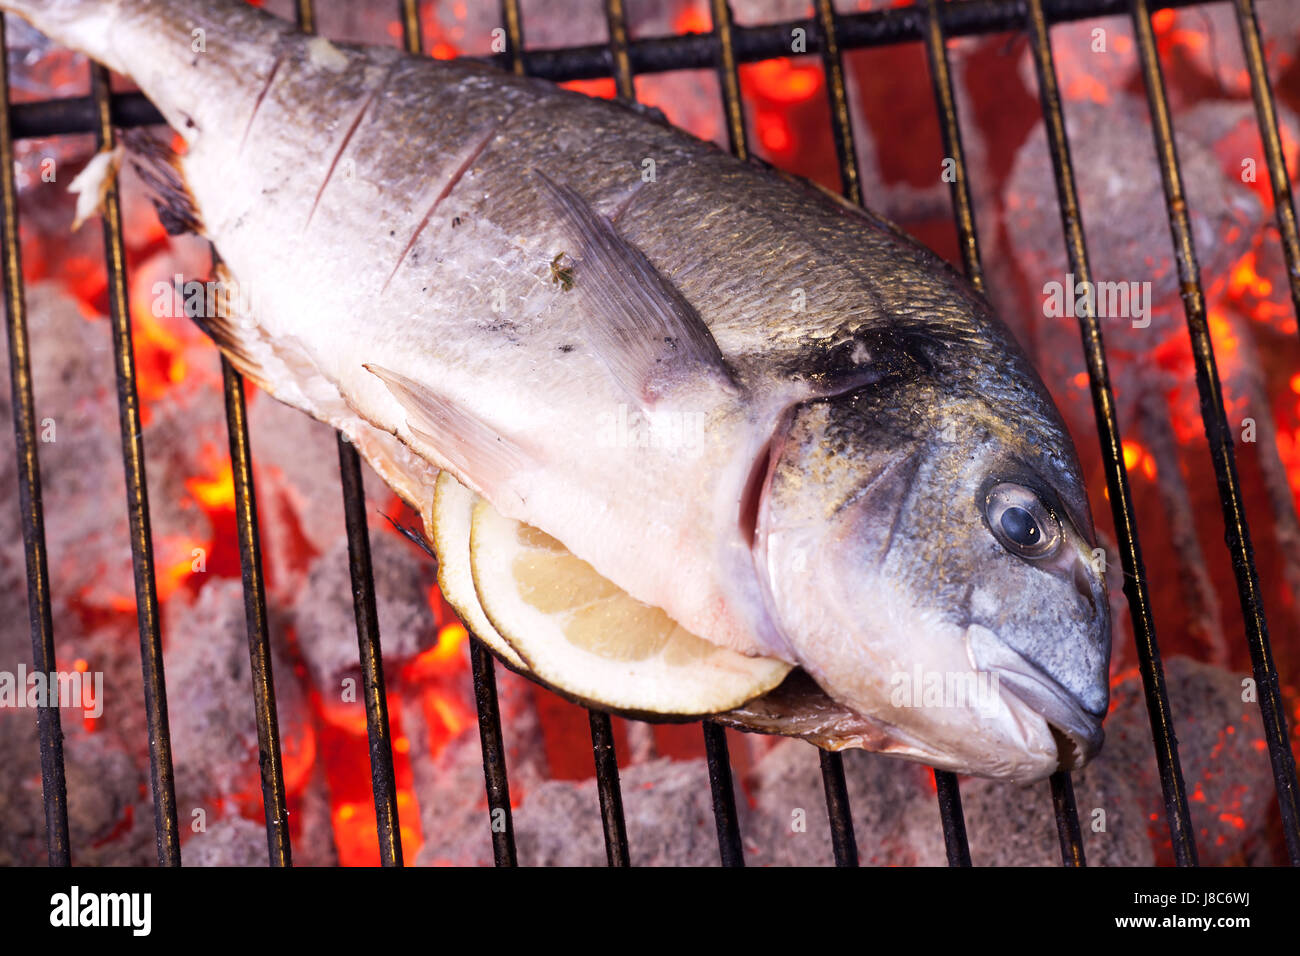 bream on a charcoal grill Stock Photo